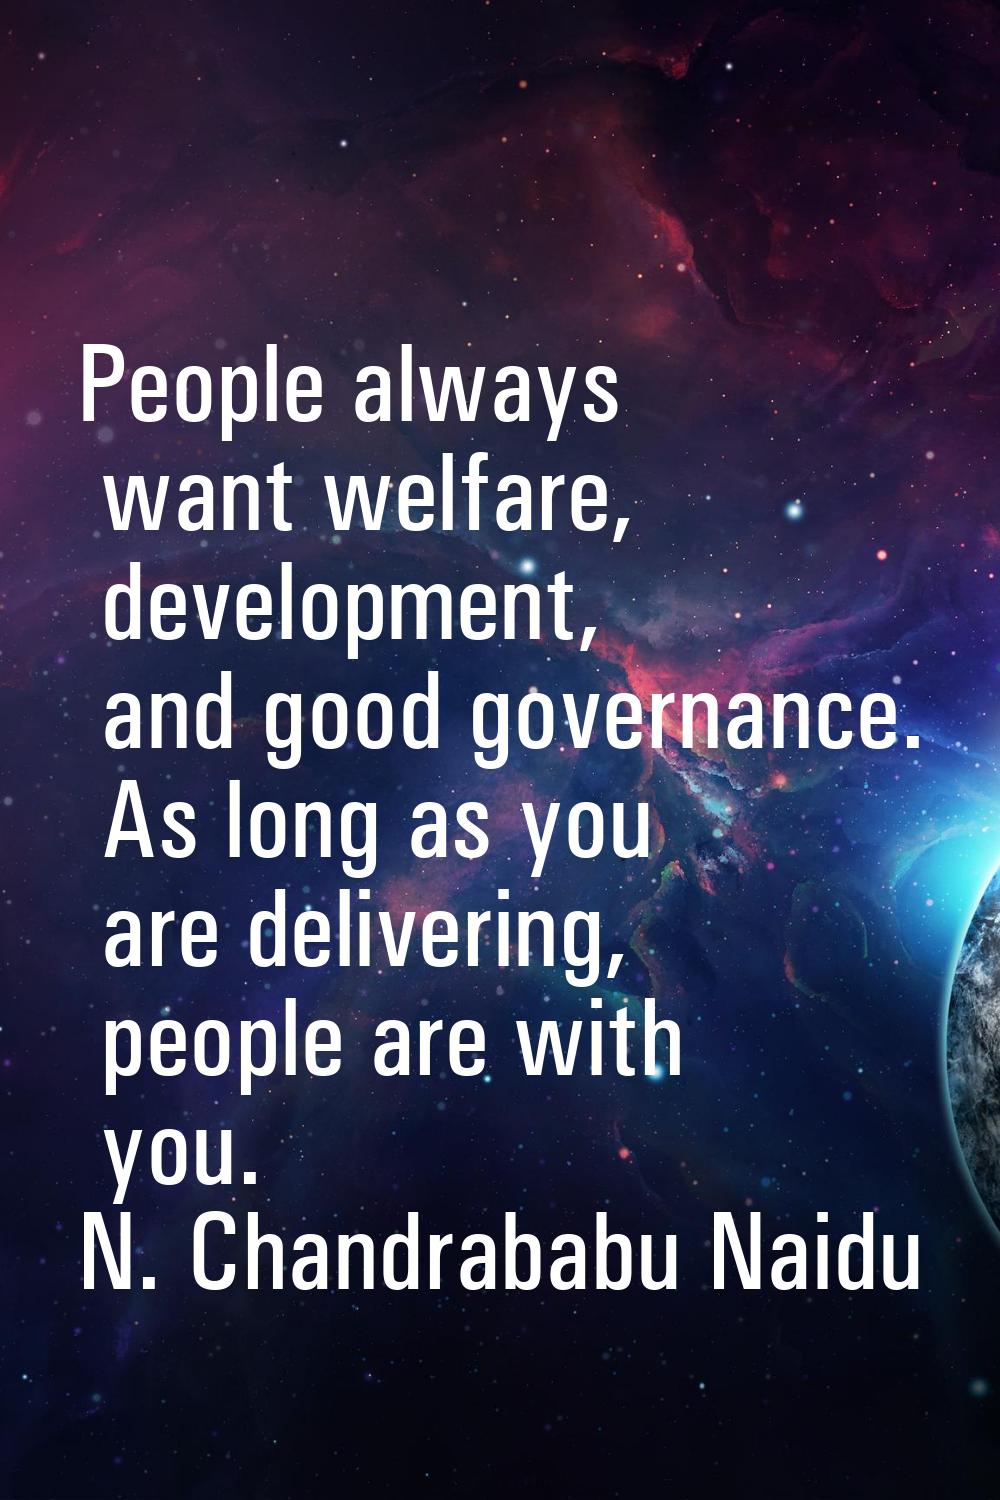 People always want welfare, development, and good governance. As long as you are delivering, people